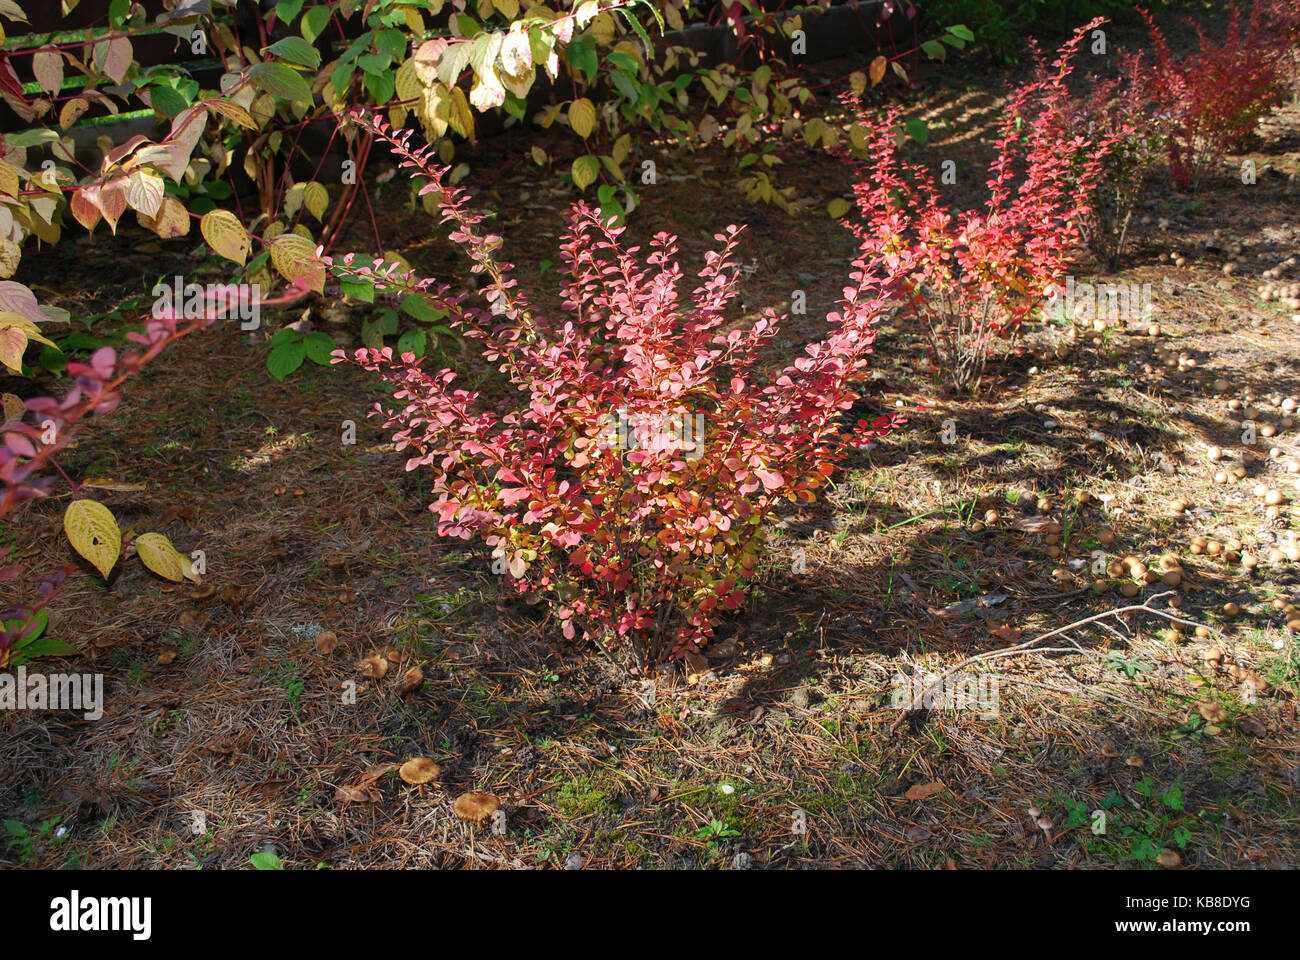 Berberis thunbergii (the Japanese barberry, Thunberg's barberry, or red barberry) grow in the flower bed. There are red leaves in the autumn. Stock Photo